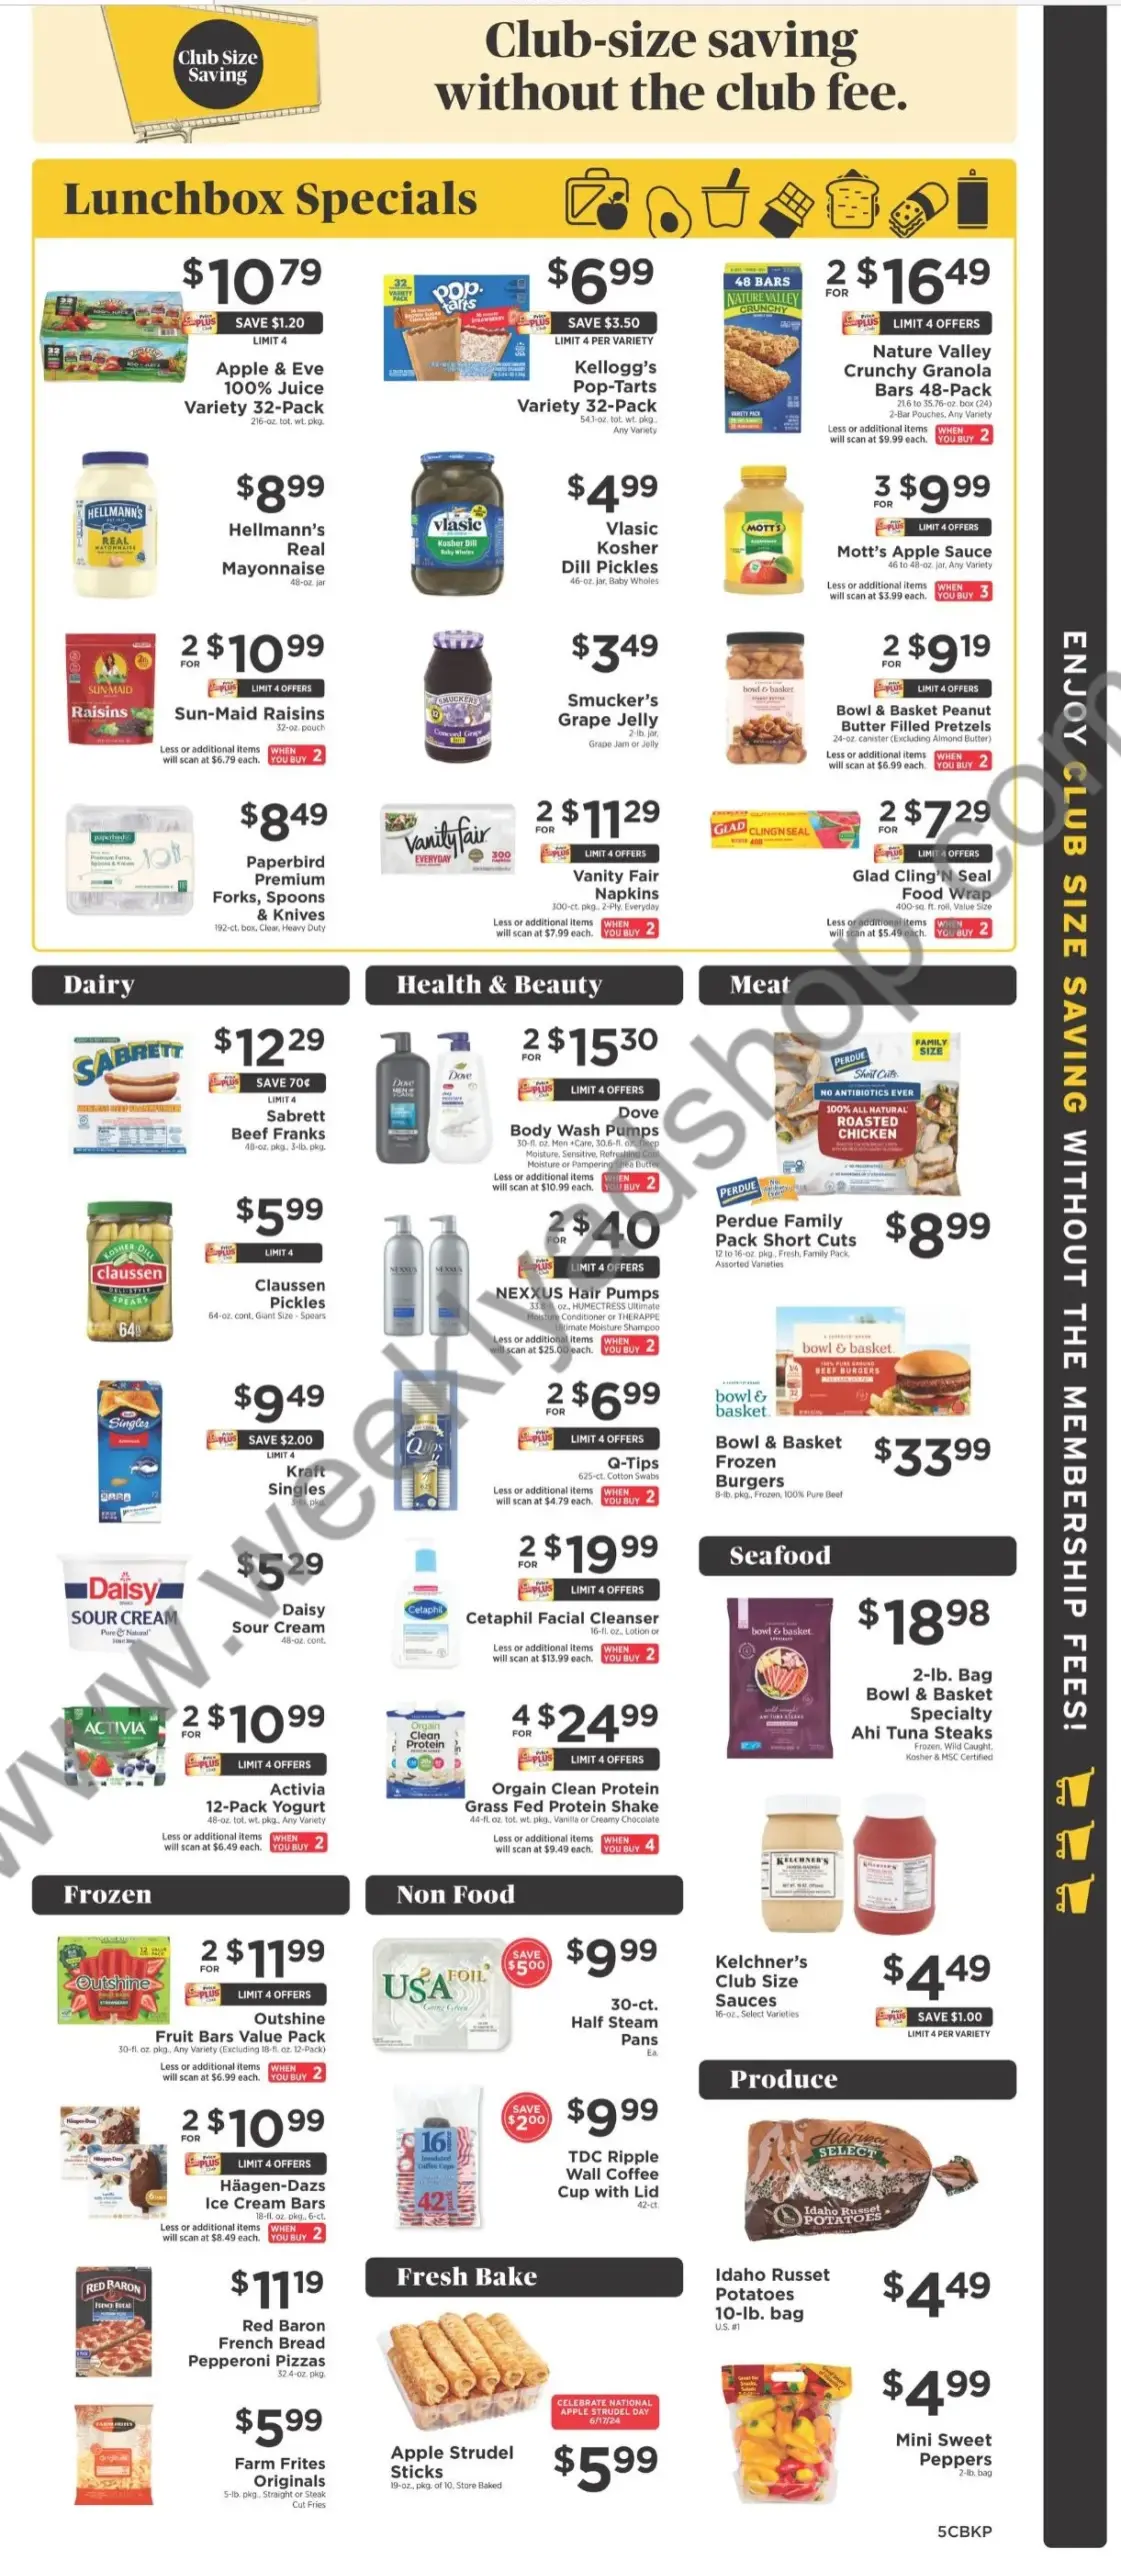 Shoprite July 2024 Weekly Sales, Deals, Discounts and Digital Coupons.